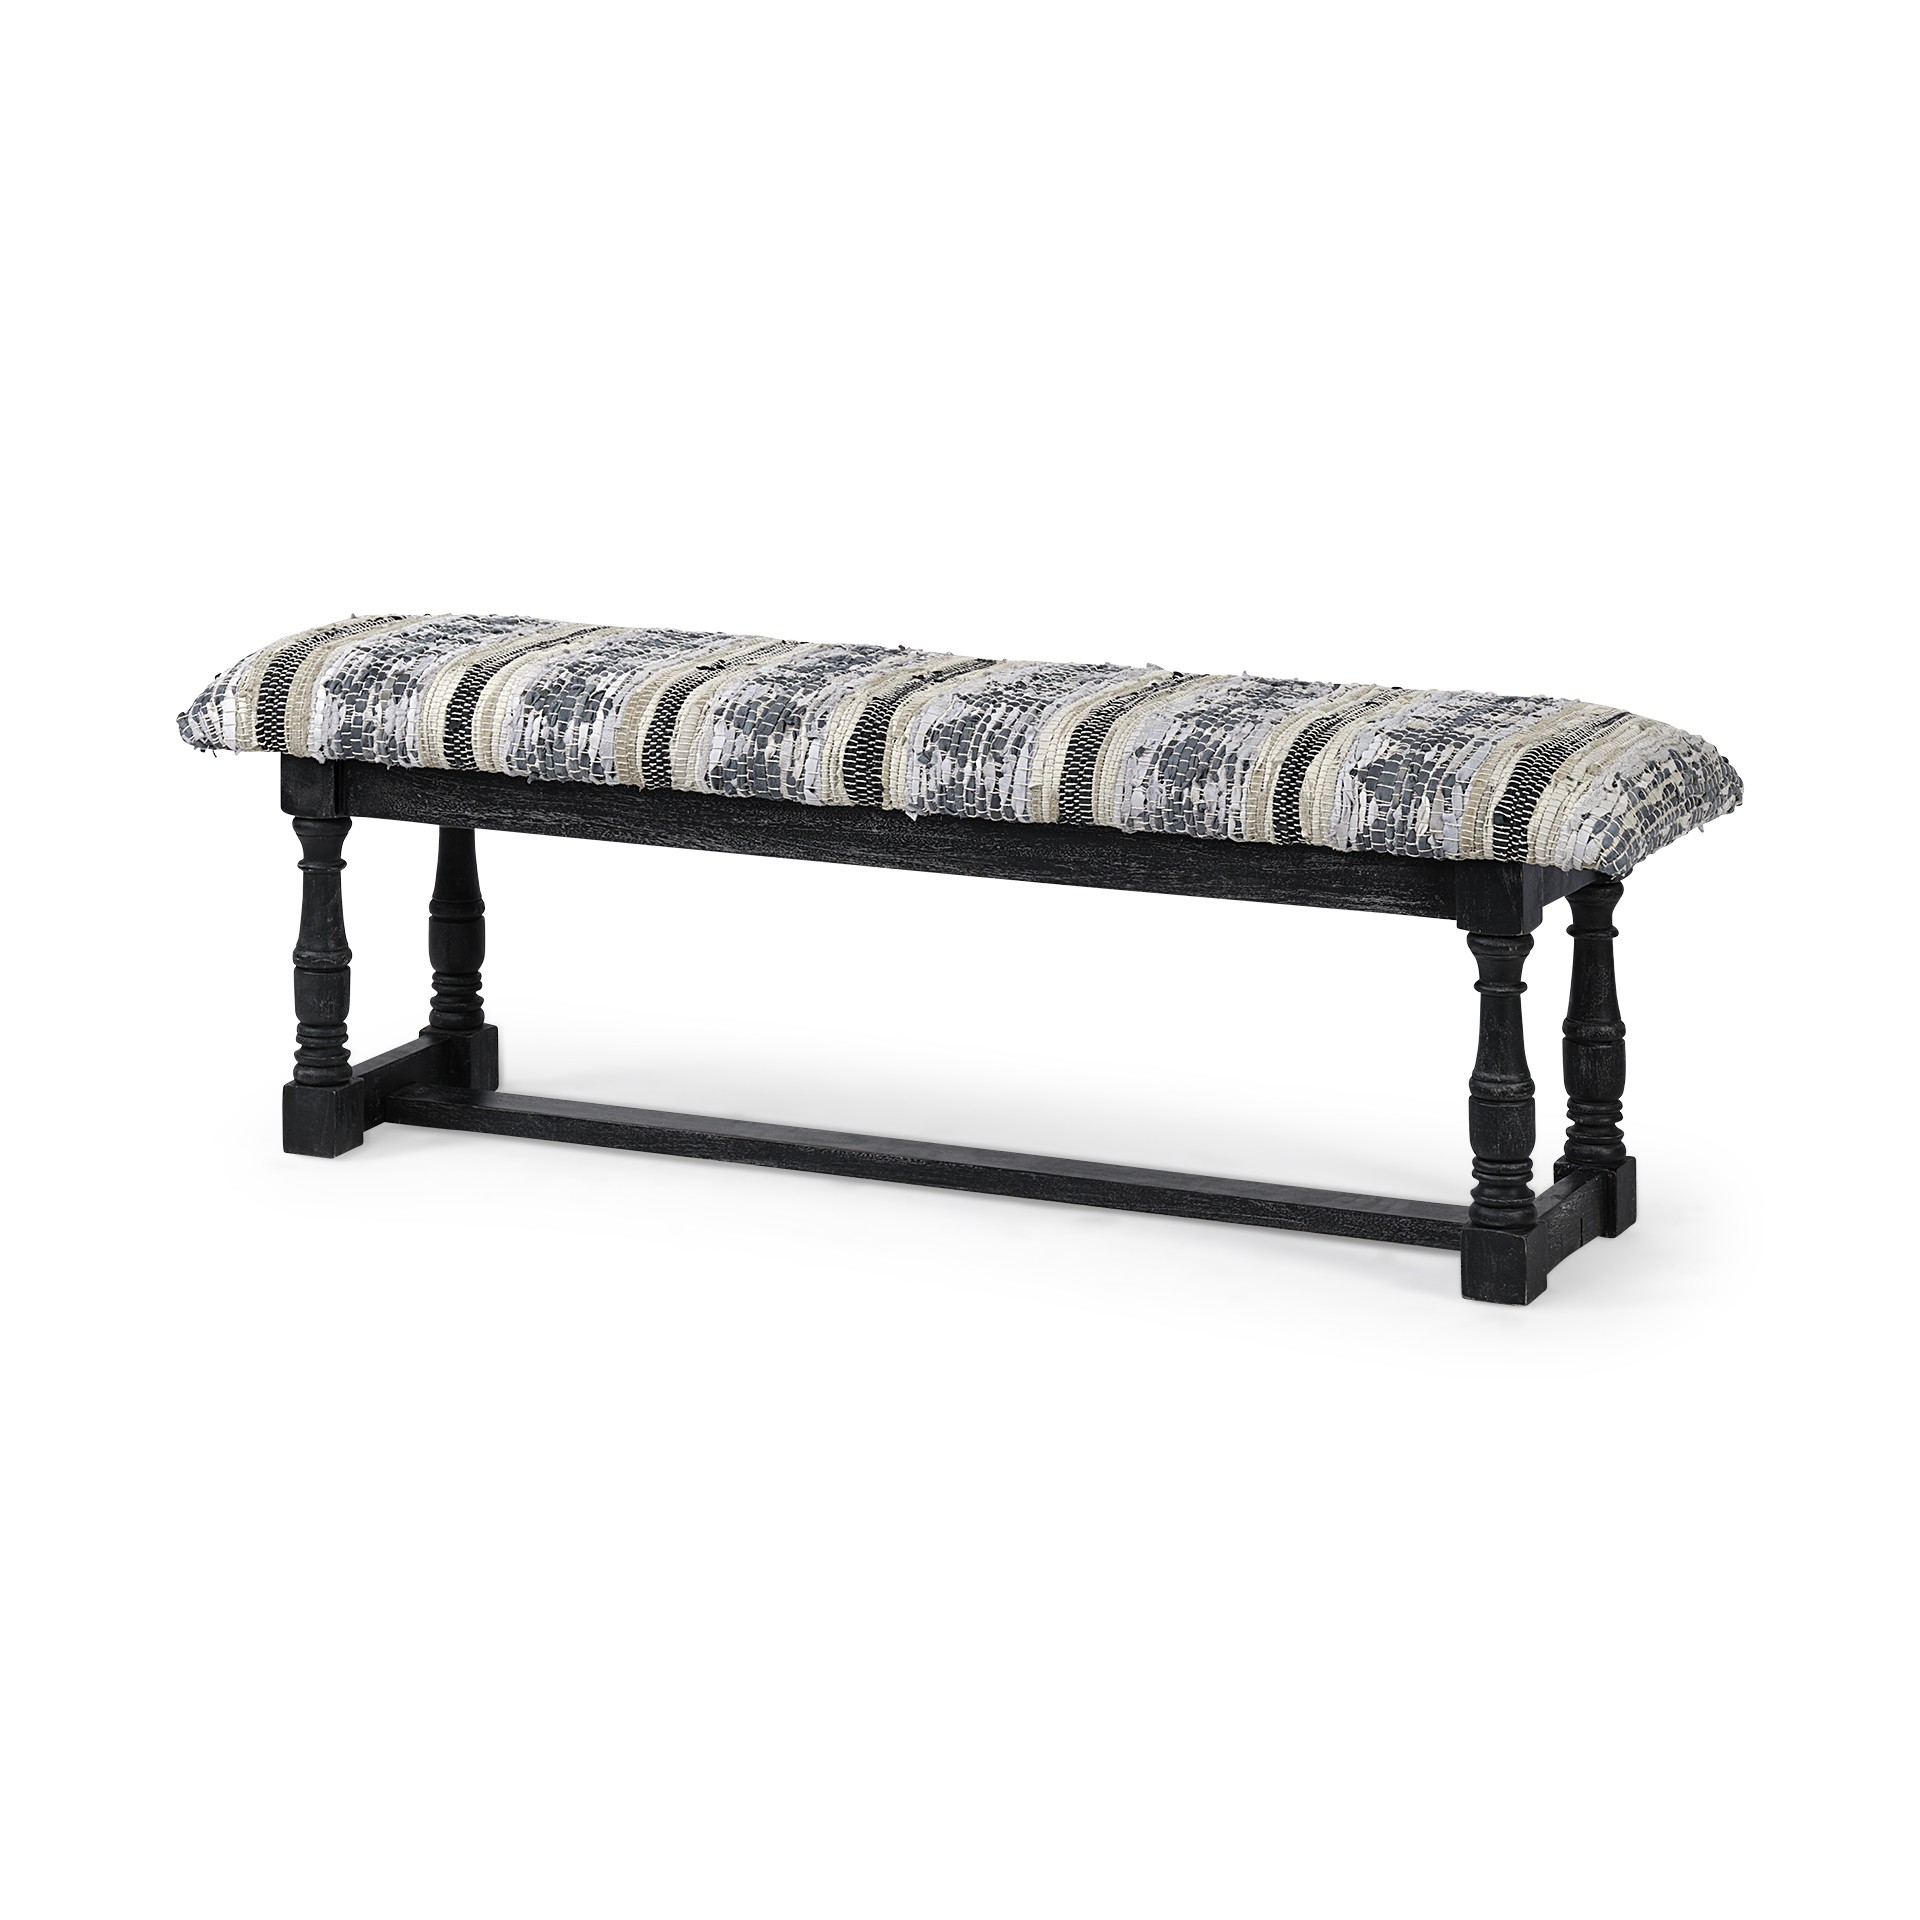 Rectangular Indian Mango Wood/Black W/ Woven-Leather Cushion Top Accent Bench